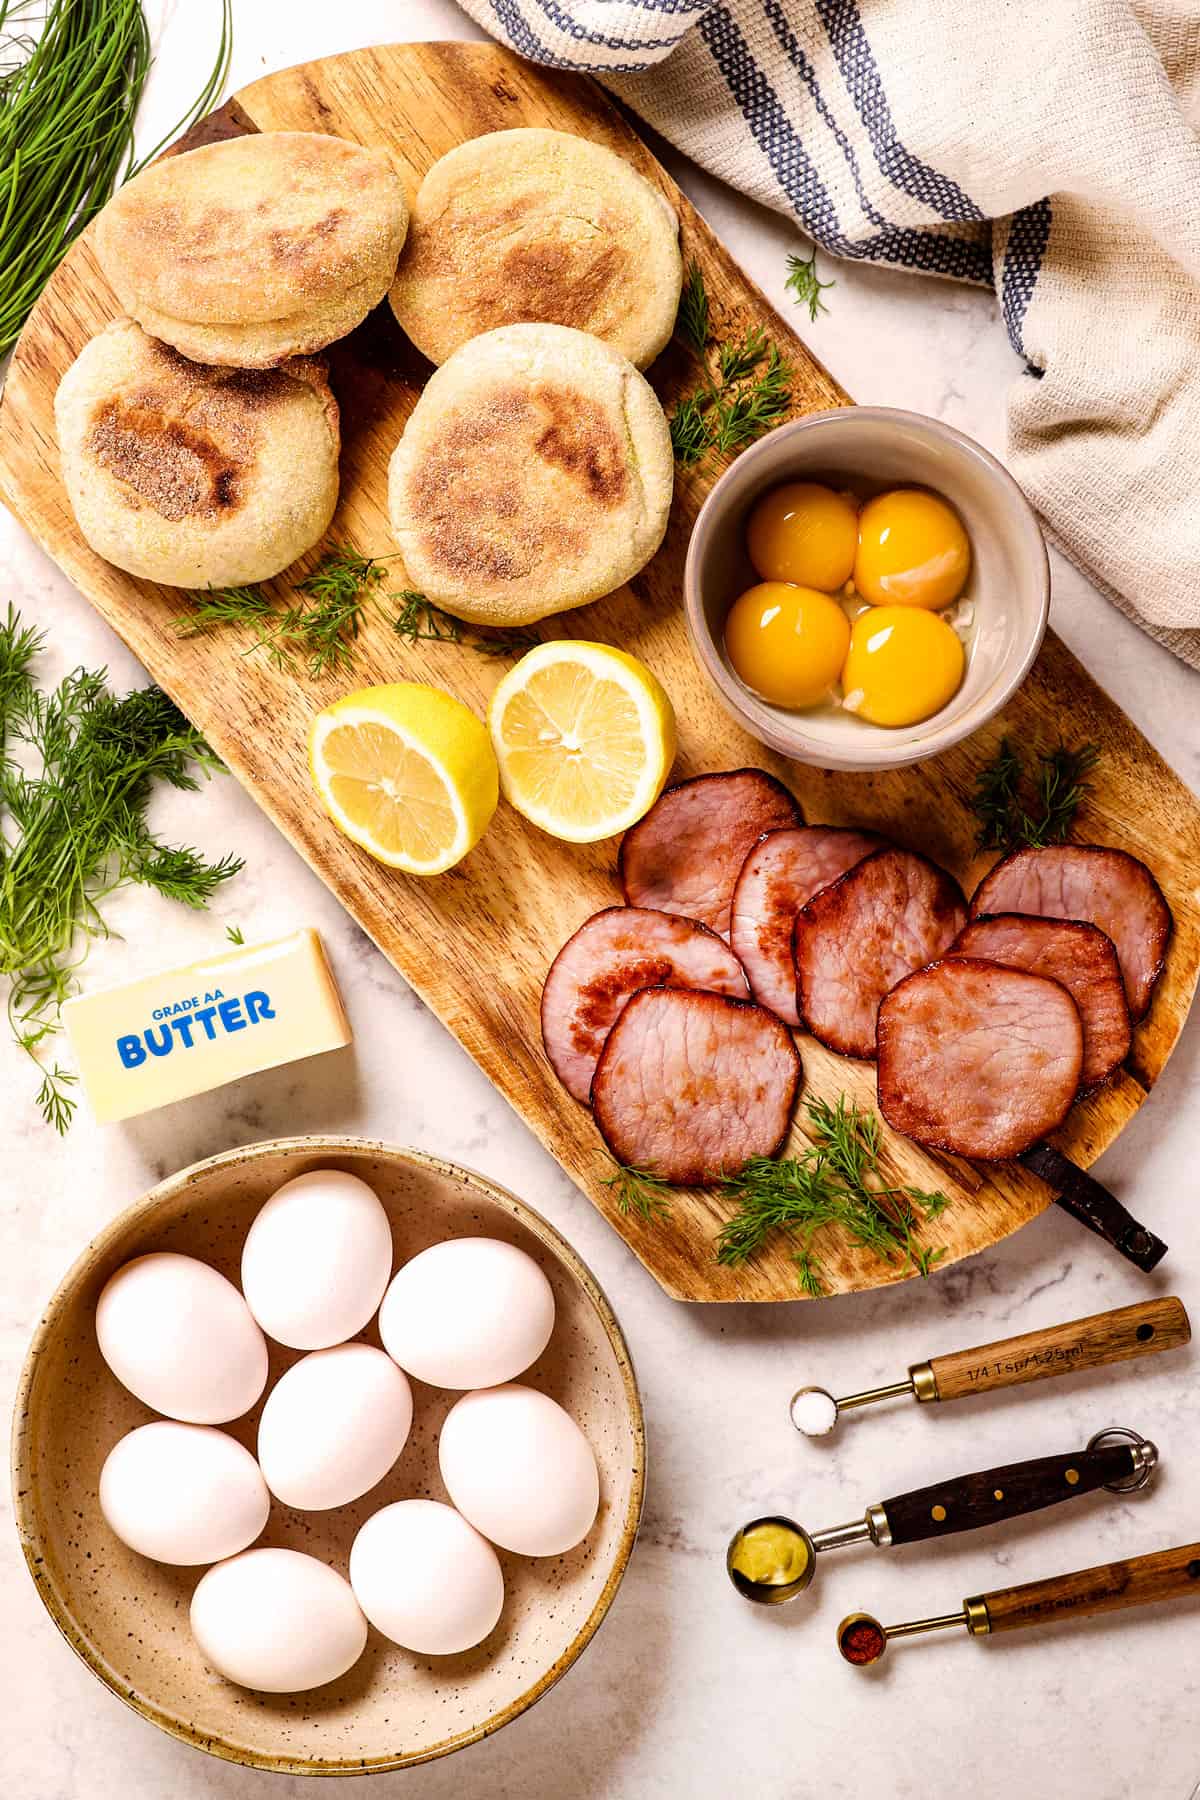 top view showing ingredients to make Eggs Benedict: eggs, Canadian bacon, English Muffins, egg yolks and butter